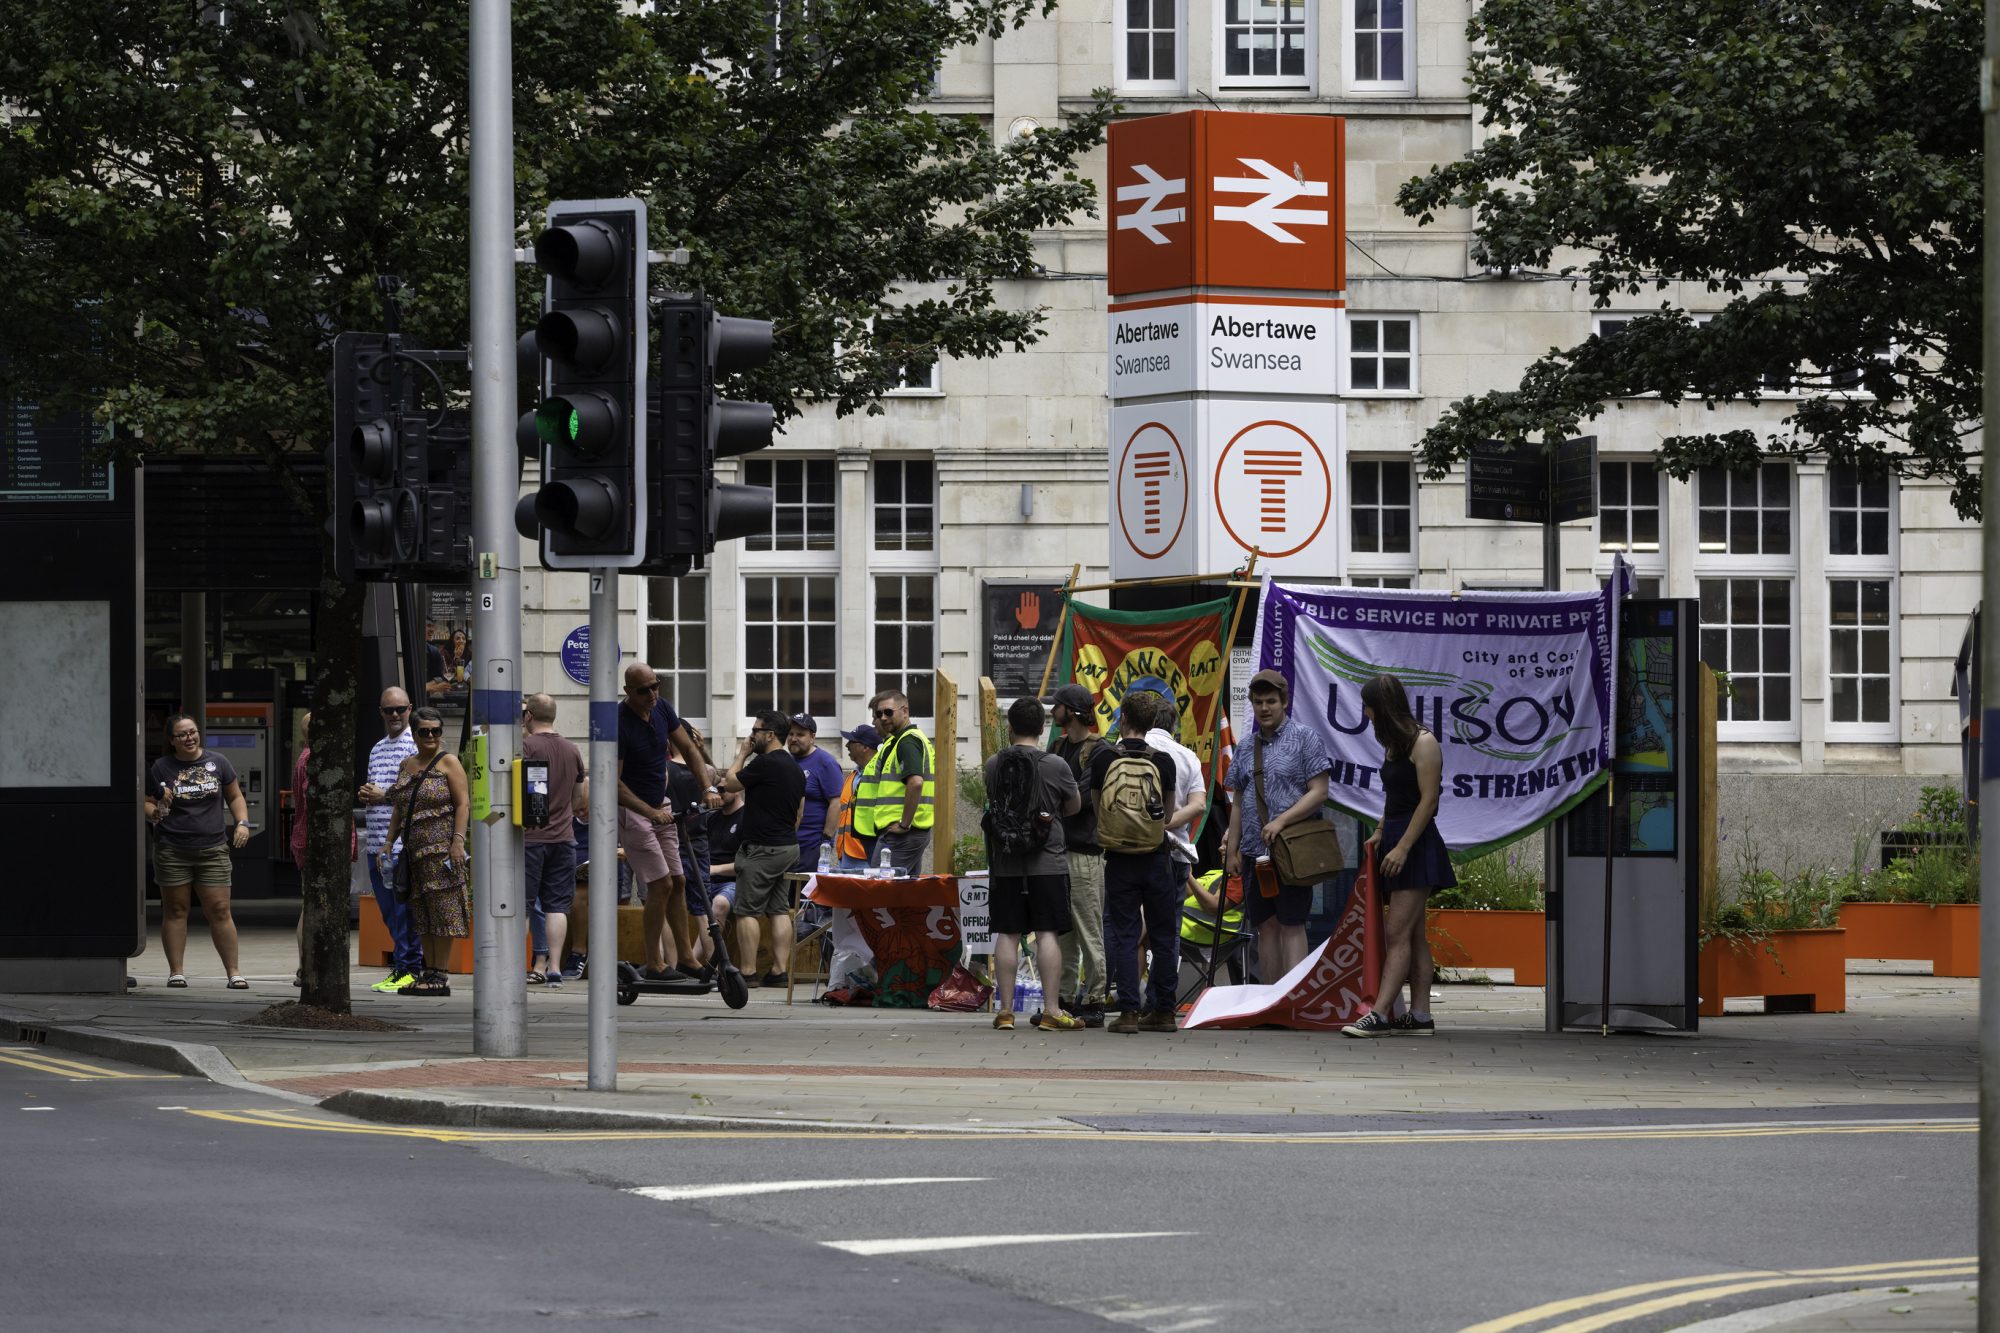 Editorial Swansea, UK - June 23, 2022: Pickets at Swansea High Street rail station during the RMT official rail strike